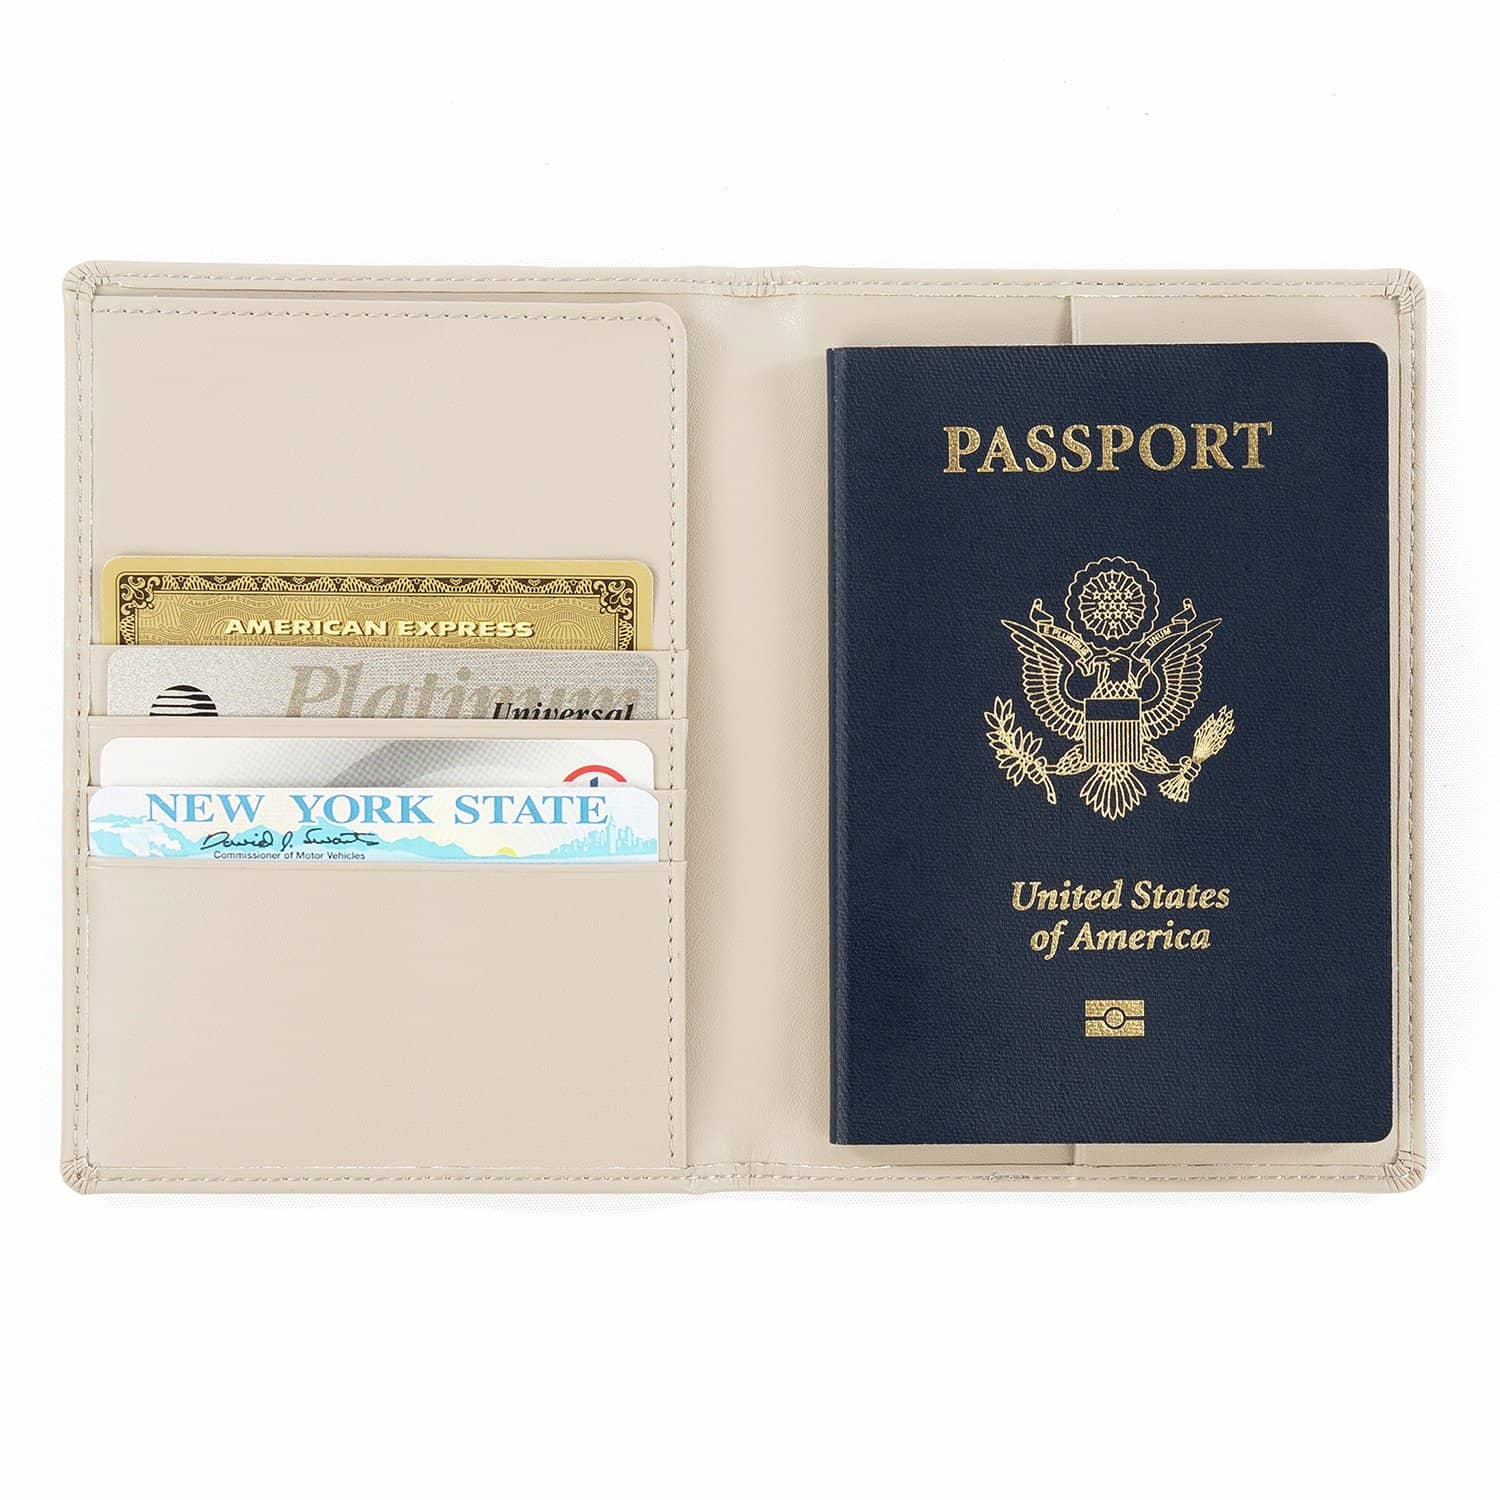 tan leather passport cover with passport and cards inside